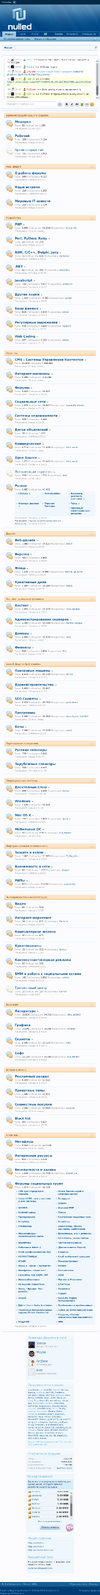 Nulled_Warez_Scripts.png